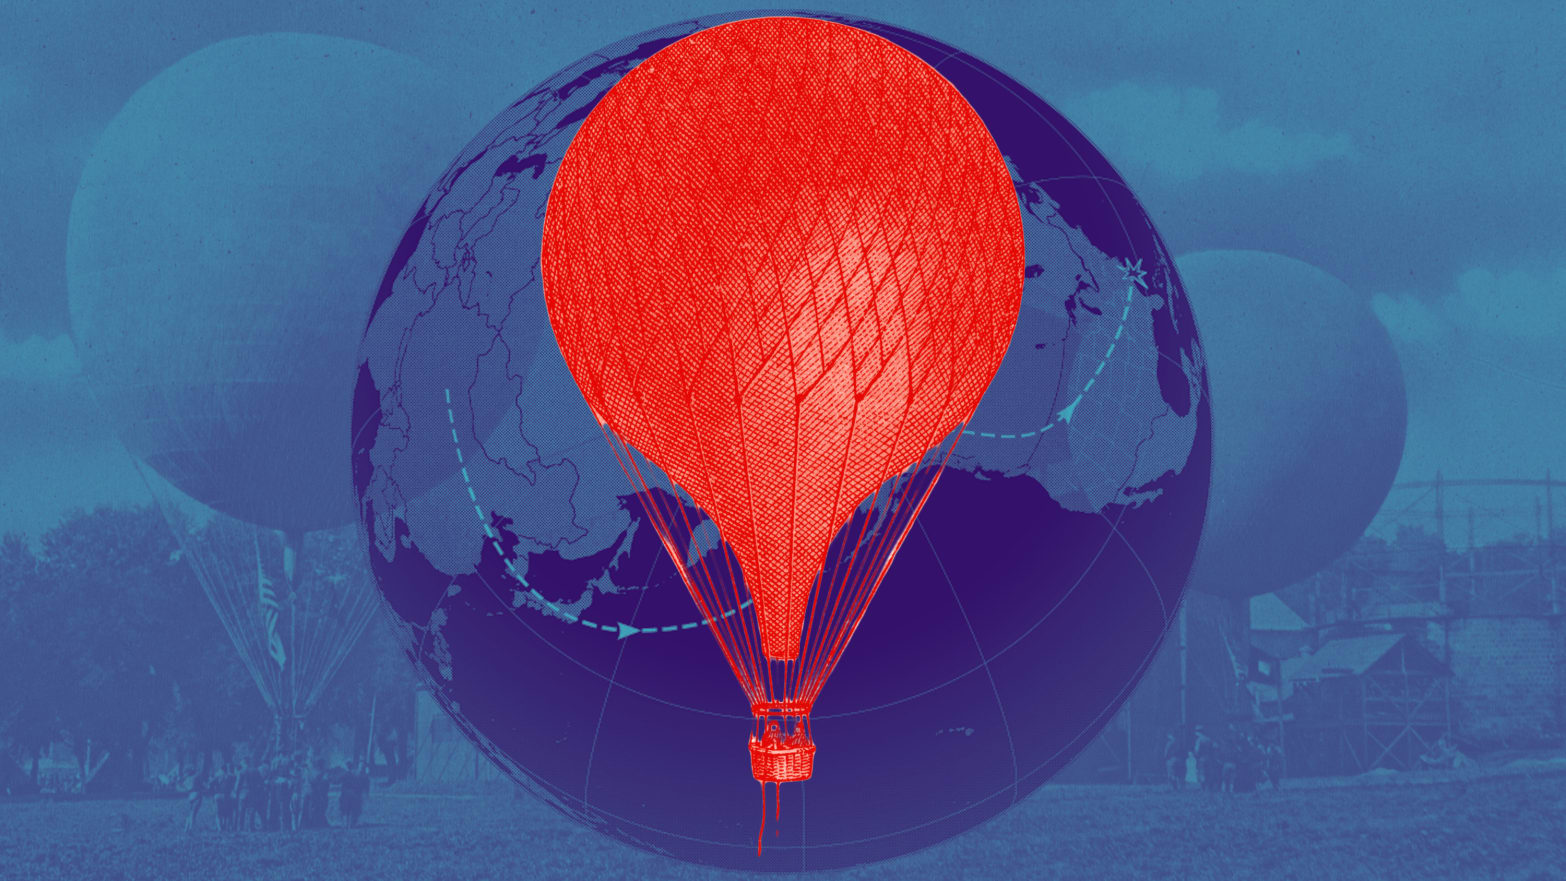 Spy Balloon’s U.S. Components Point to the Need for Tougher Export Controls